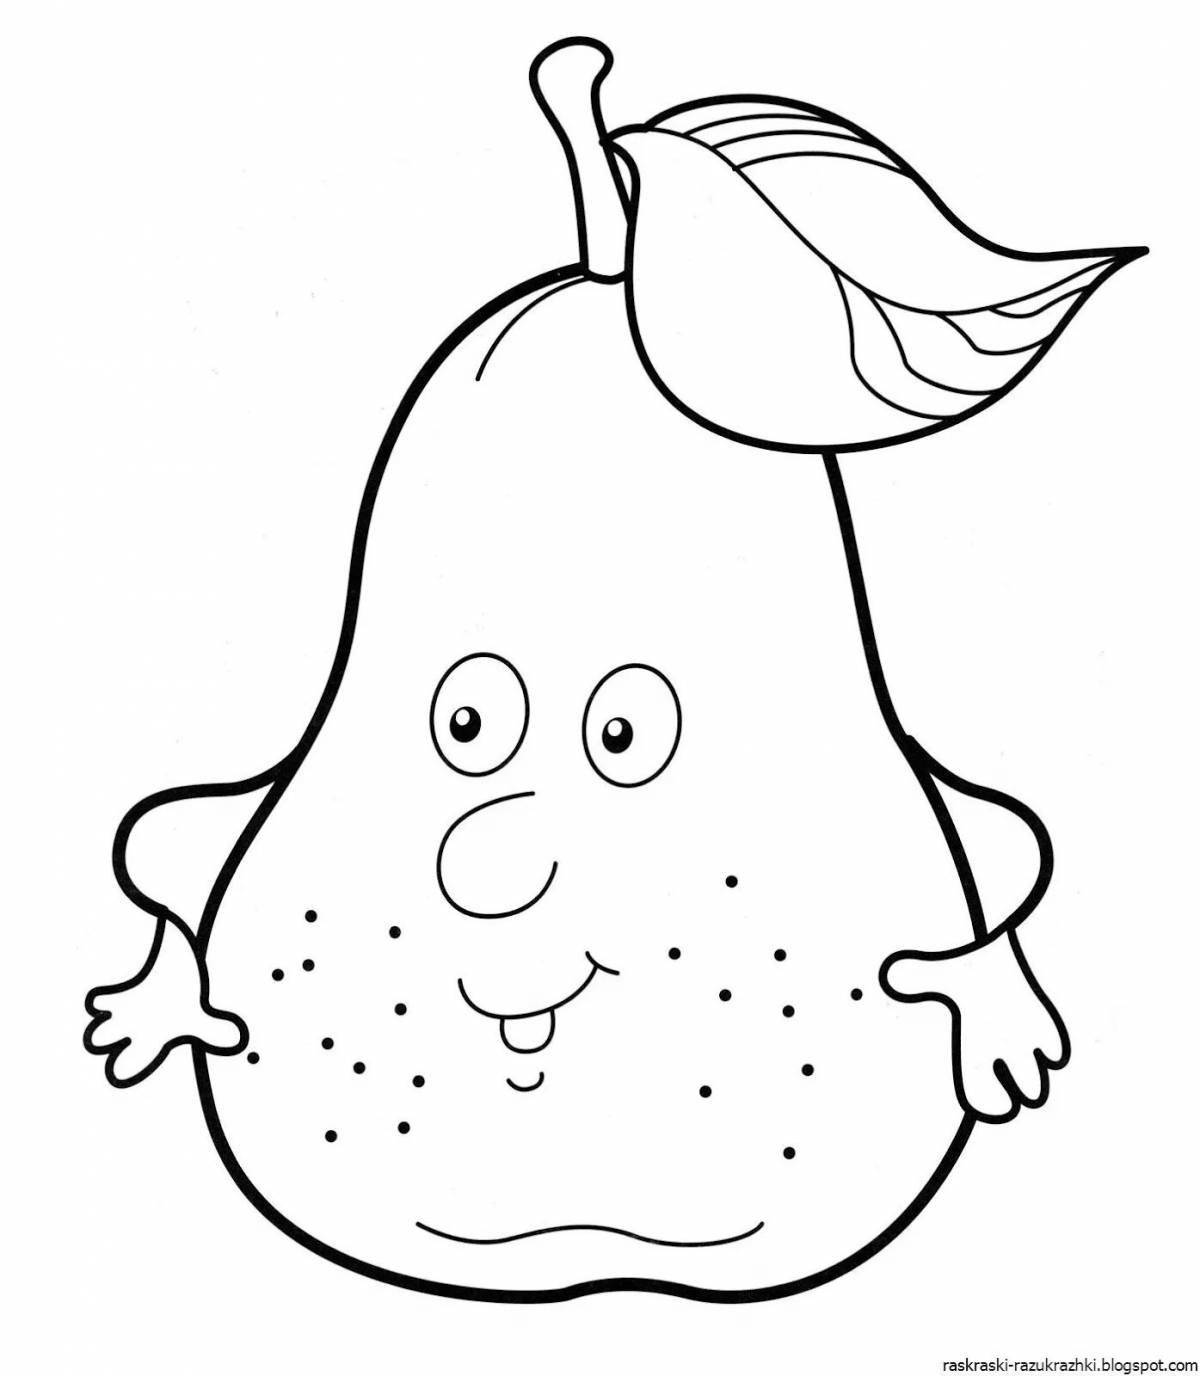 Amazing pear coloring book for 3-4 year olds